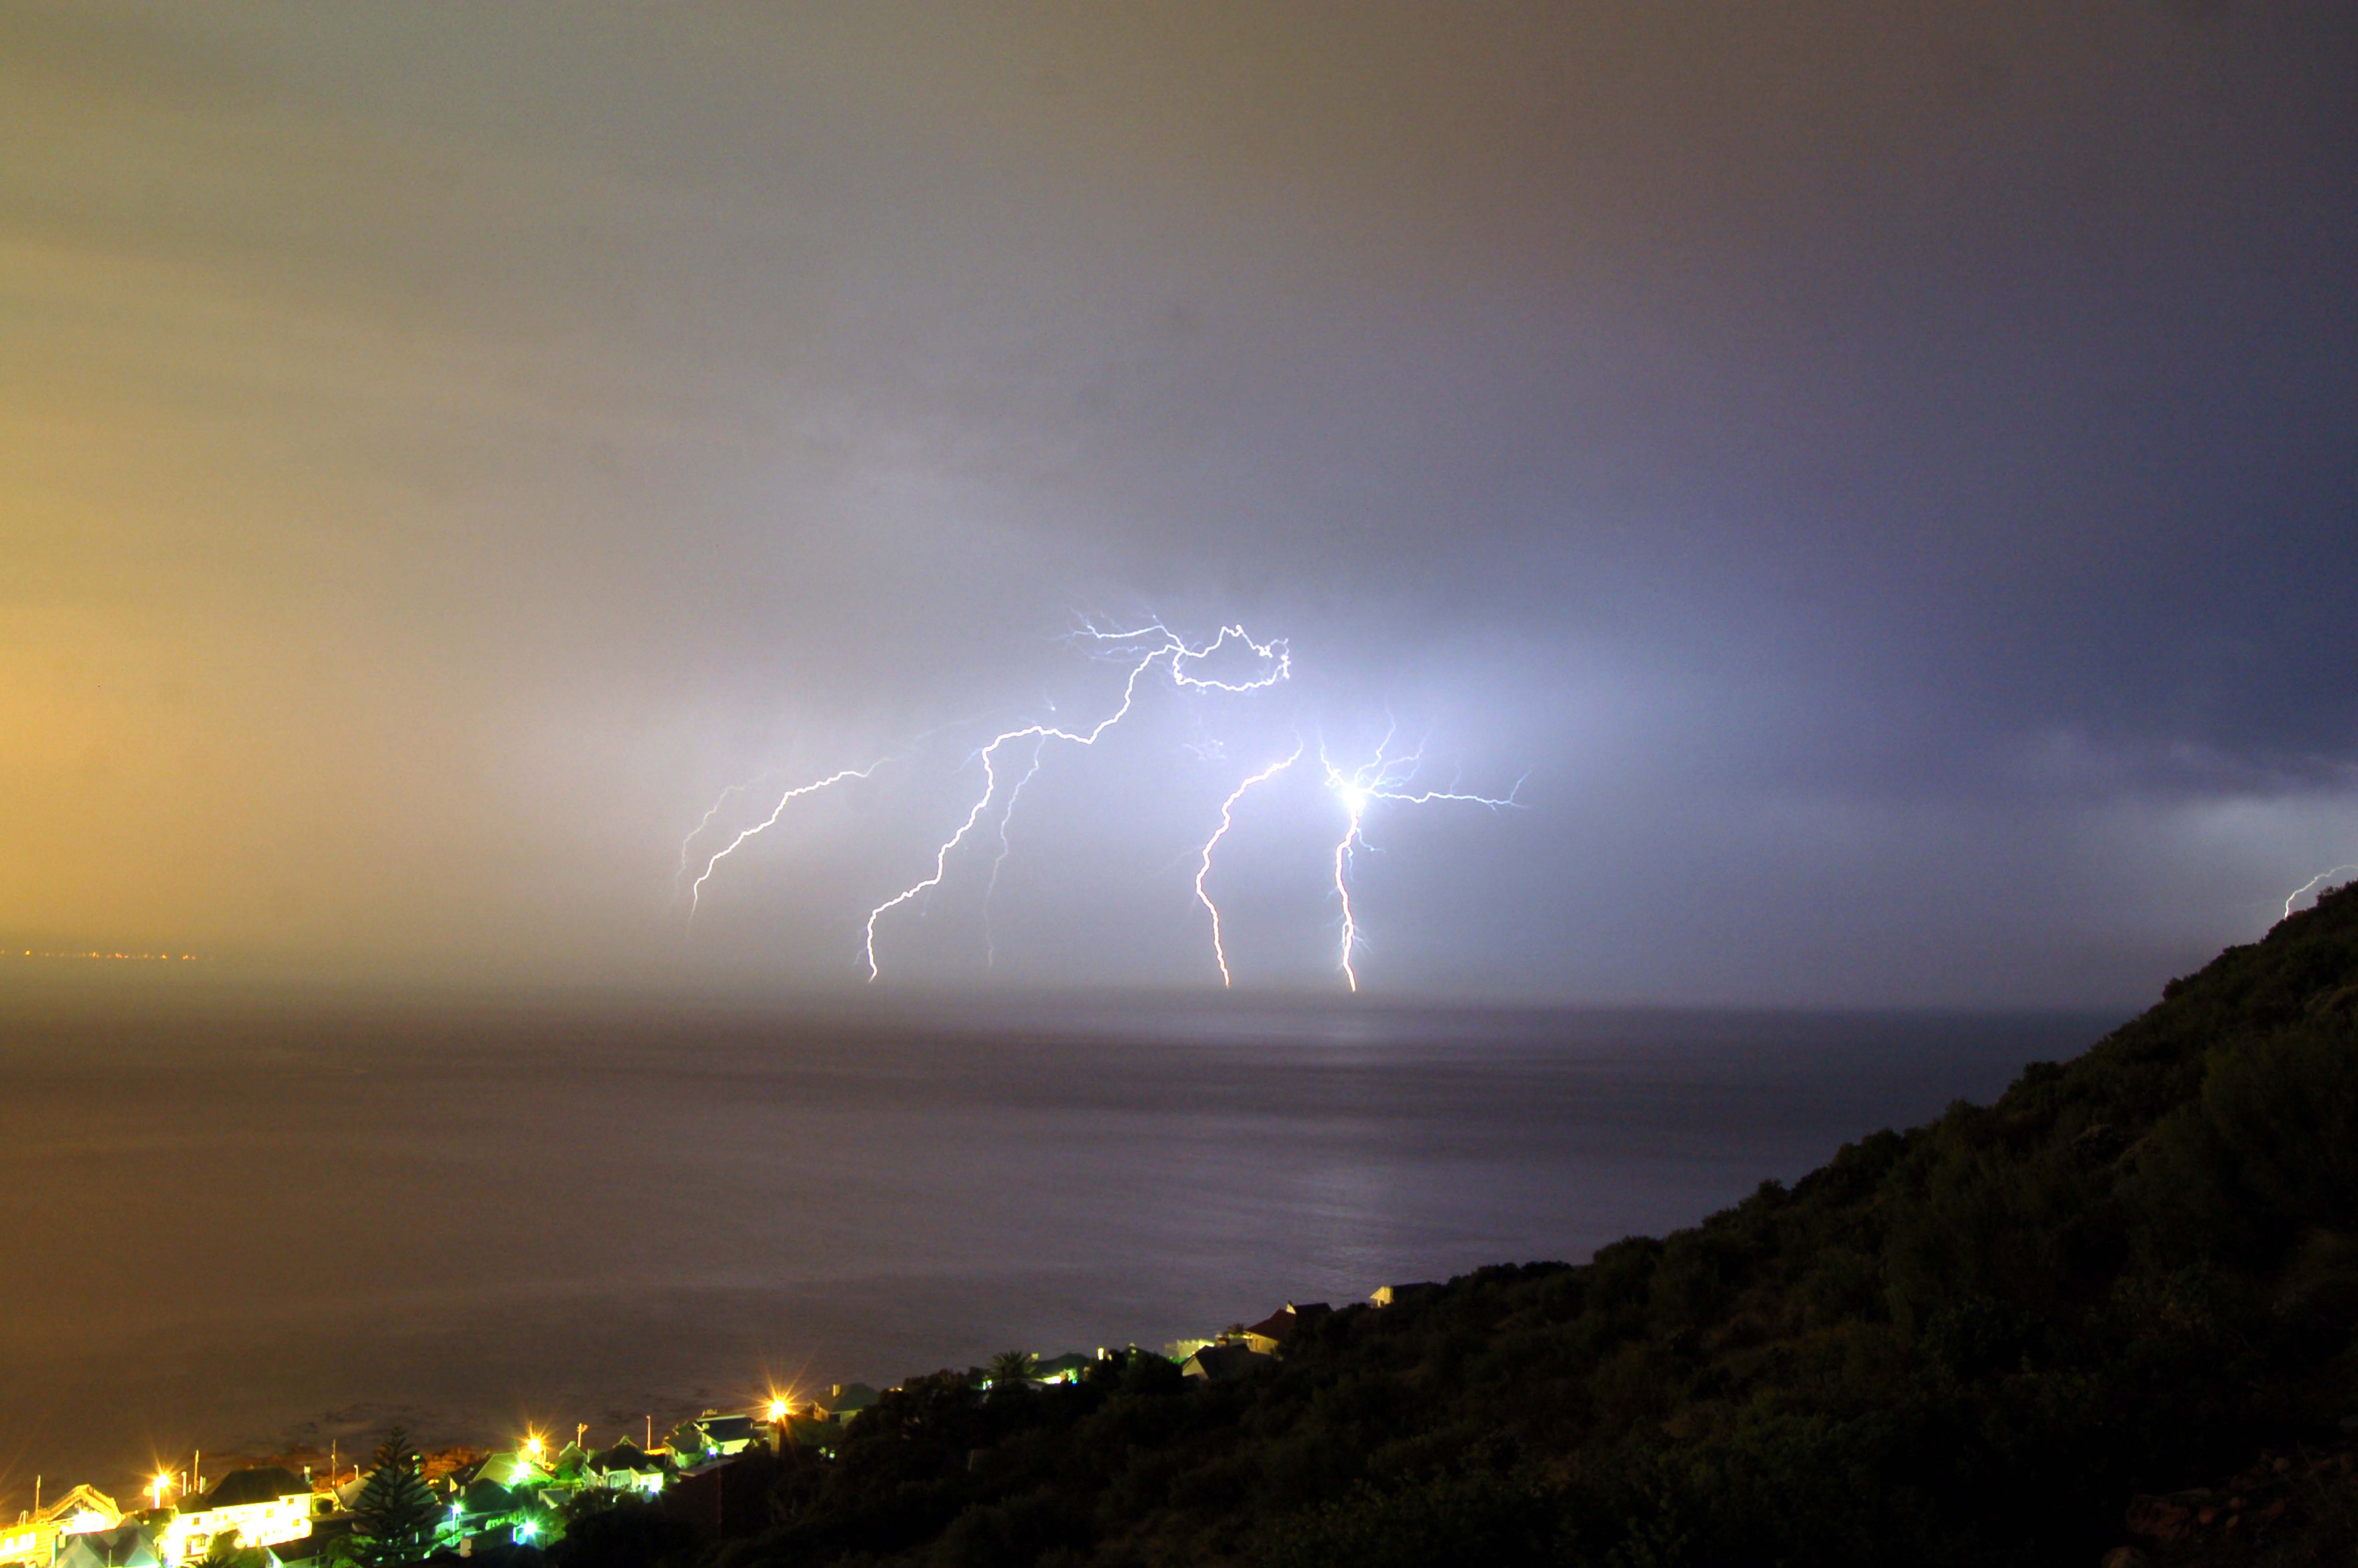 South Africa. Western Cape. Lightening strikes over False Bay in Cape Town.